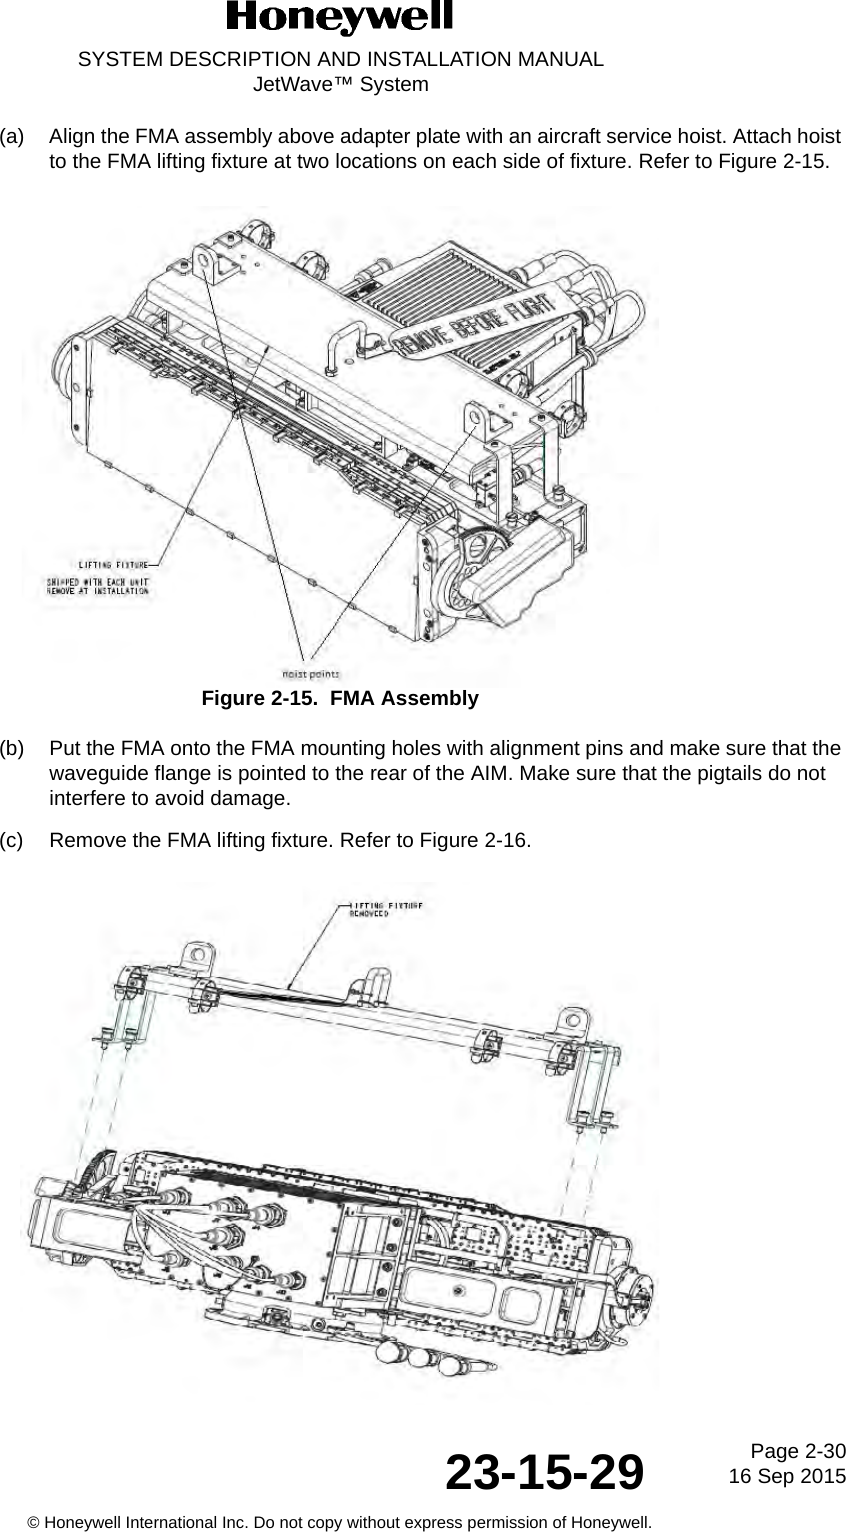 Page 2-30 16 Sep 201523-15-29SYSTEM DESCRIPTION AND INSTALLATION MANUALJetWave™ System© Honeywell International Inc. Do not copy without express permission of Honeywell.(a) Align the FMA assembly above adapter plate with an aircraft service hoist. Attach hoist to the FMA lifting fixture at two locations on each side of fixture. Refer to Figure 2-15.Figure 2-15.  FMA Assembly(b) Put the FMA onto the FMA mounting holes with alignment pins and make sure that the waveguide flange is pointed to the rear of the AIM. Make sure that the pigtails do not interfere to avoid damage.(c) Remove the FMA lifting fixture. Refer to Figure 2-16.